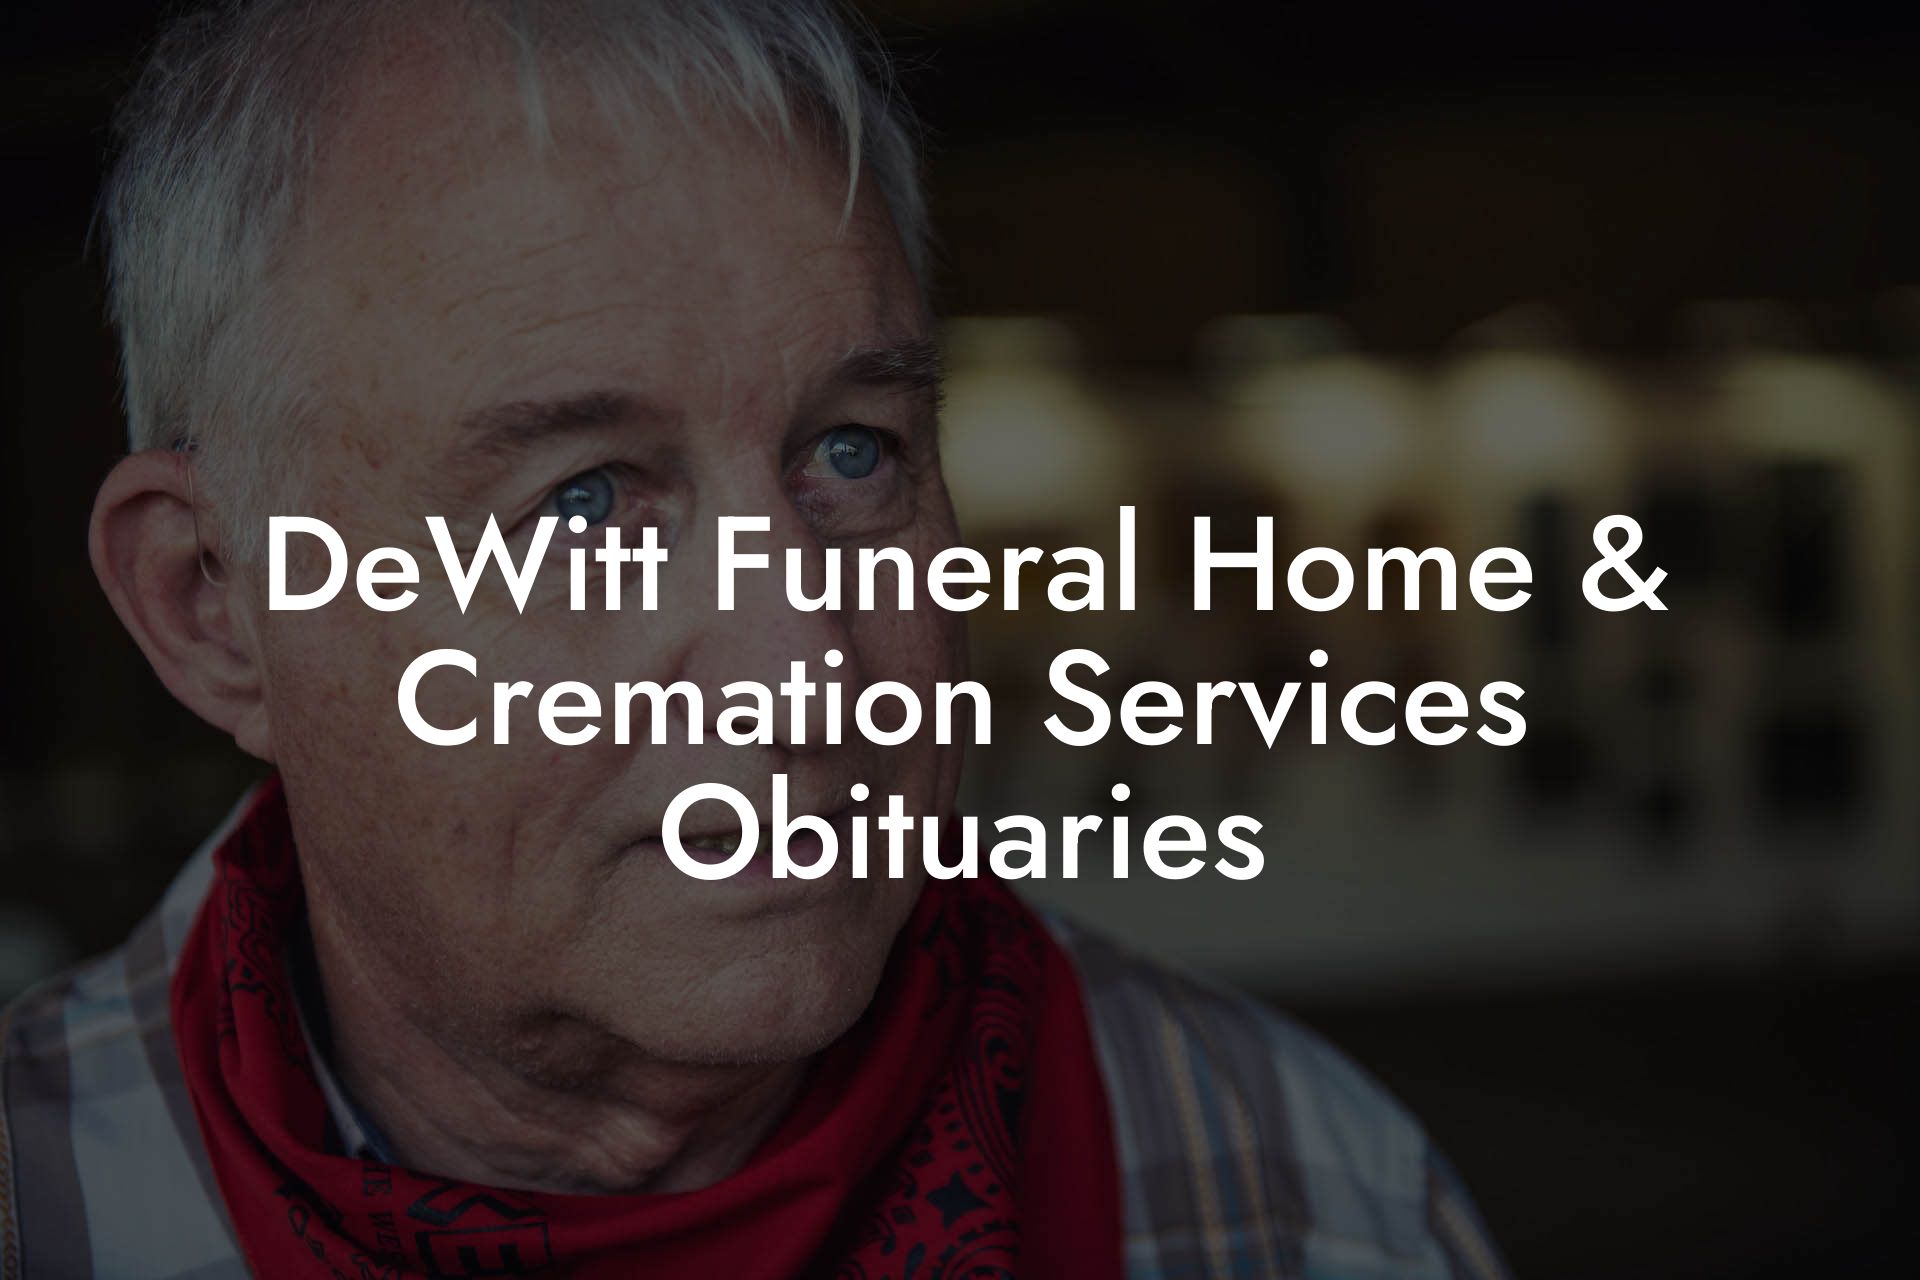 DeWitt Funeral Home & Cremation Services Obituaries